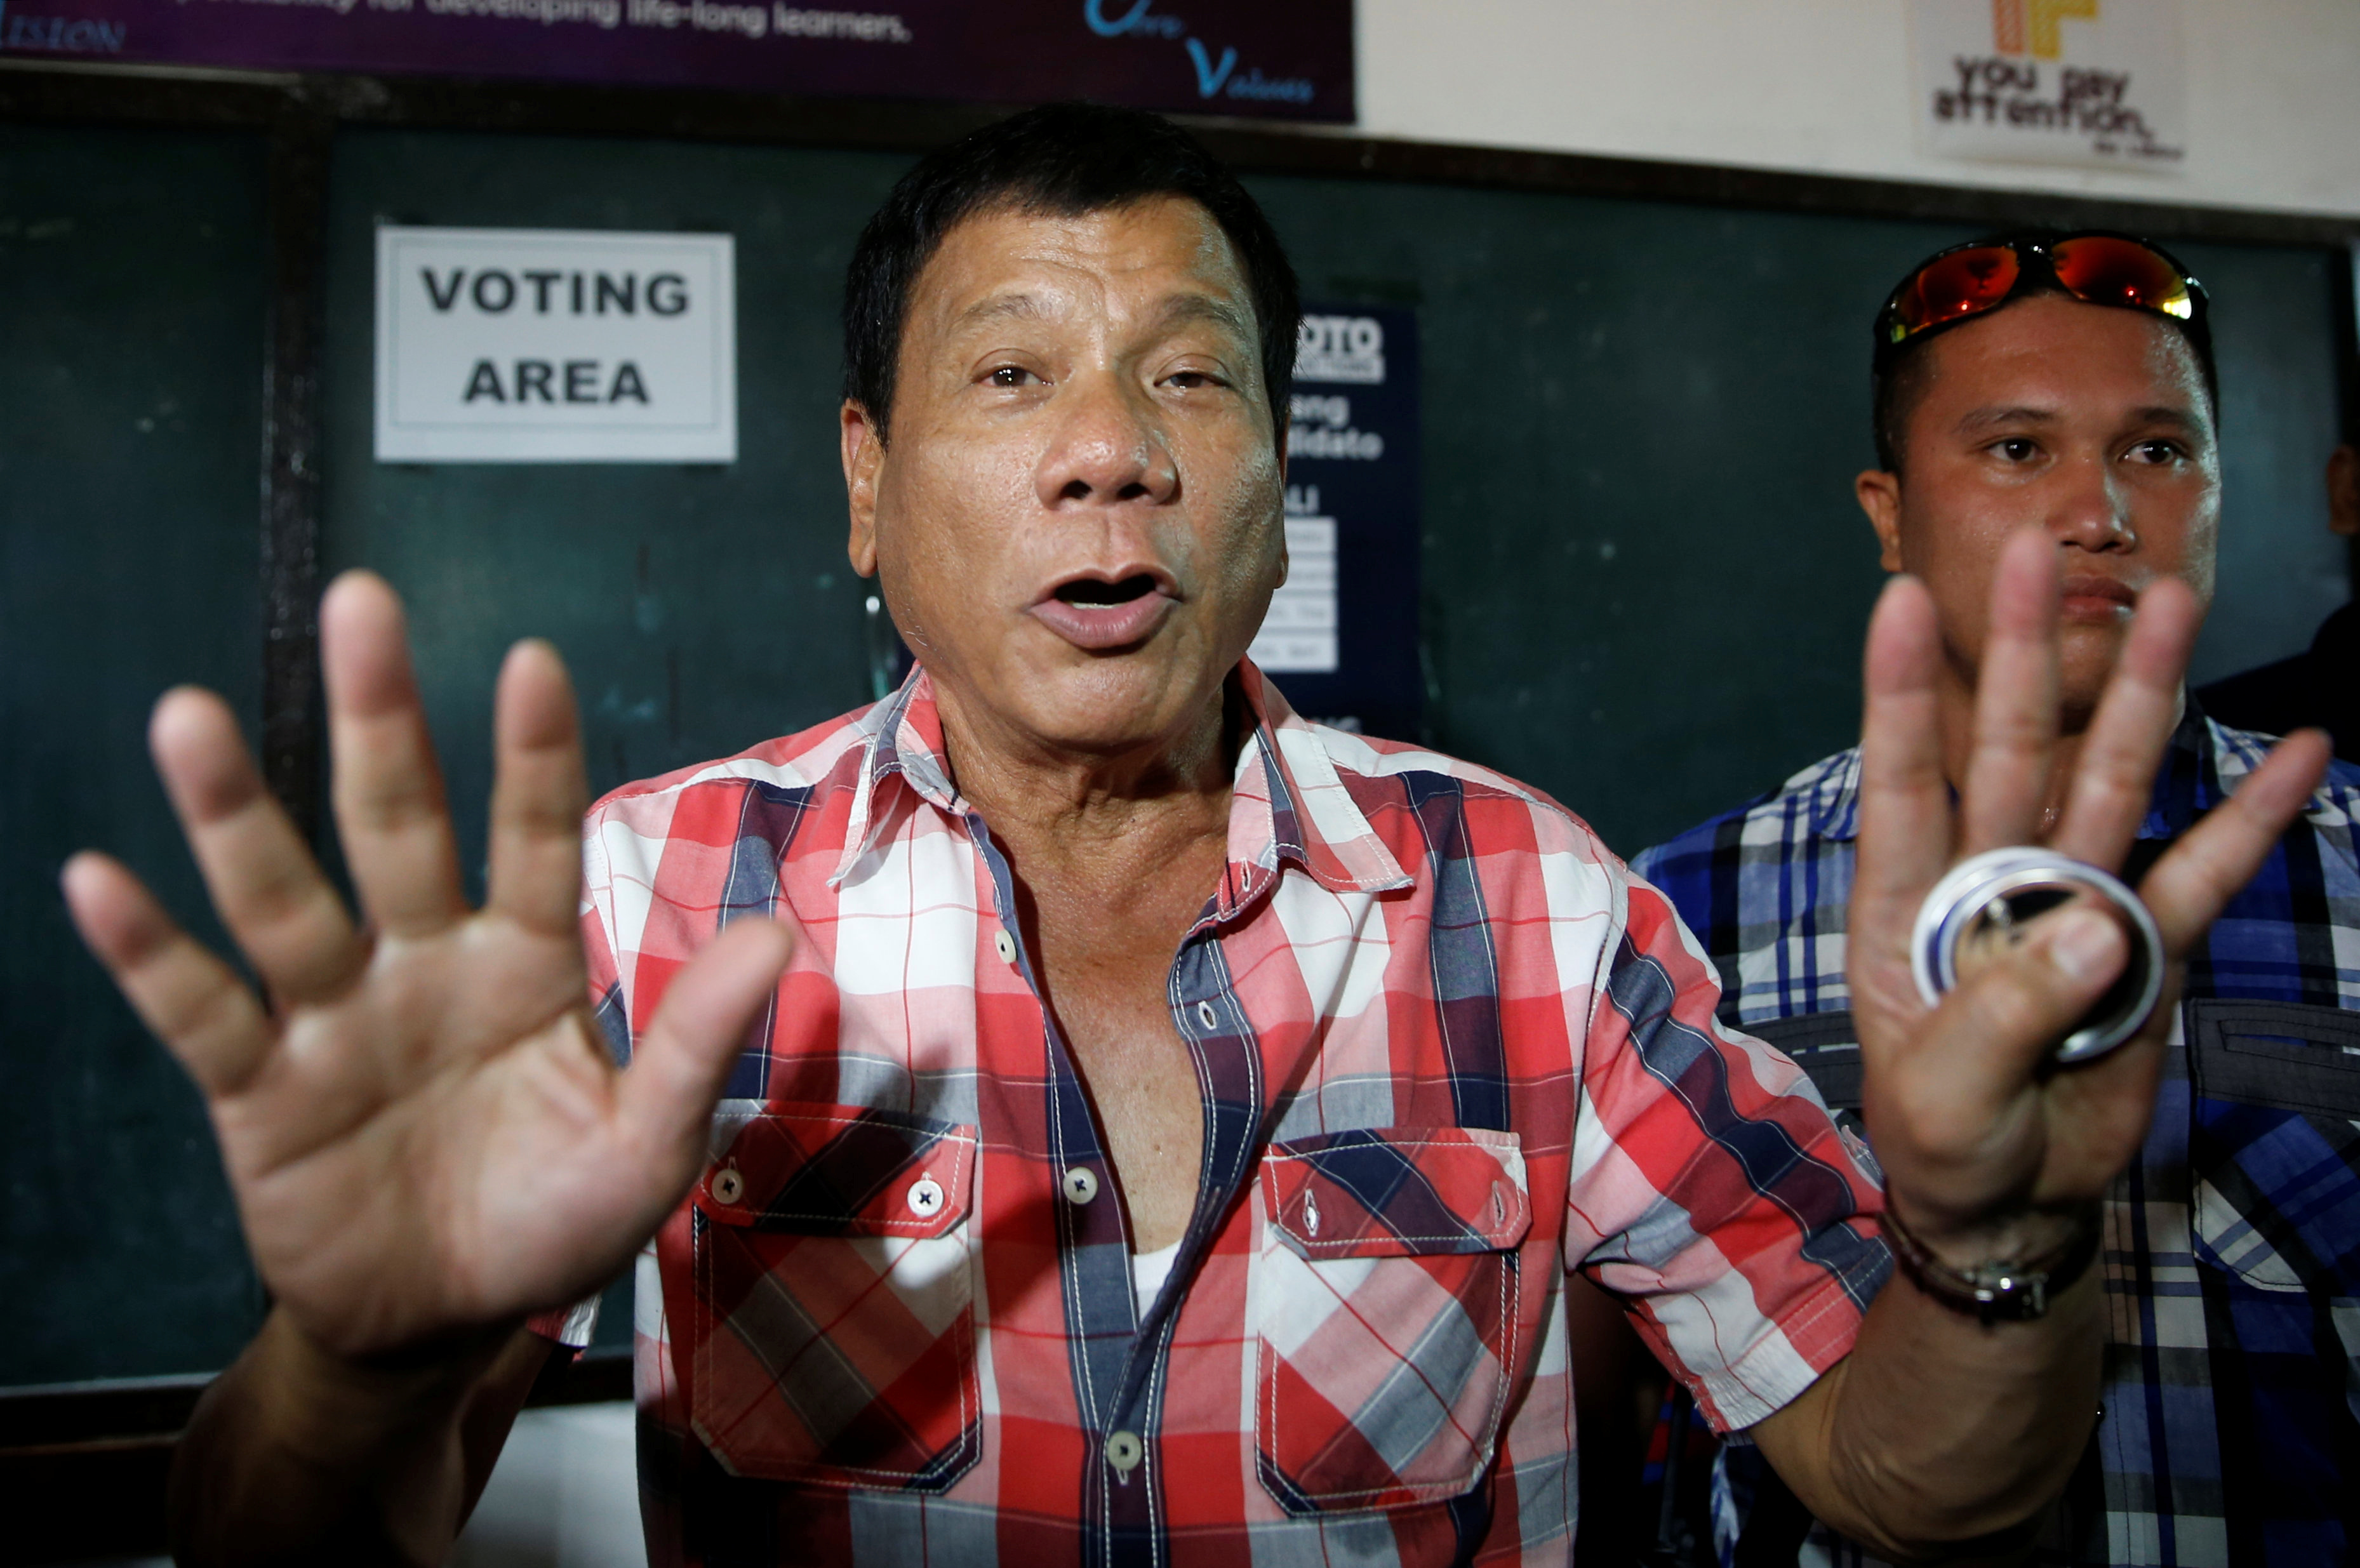 Presidential candidate Rodrigo "Digong" Duterte talks to the media before casting his vote at a polling precinct for national elections at Daniel Aguinaldo National High School in Davao